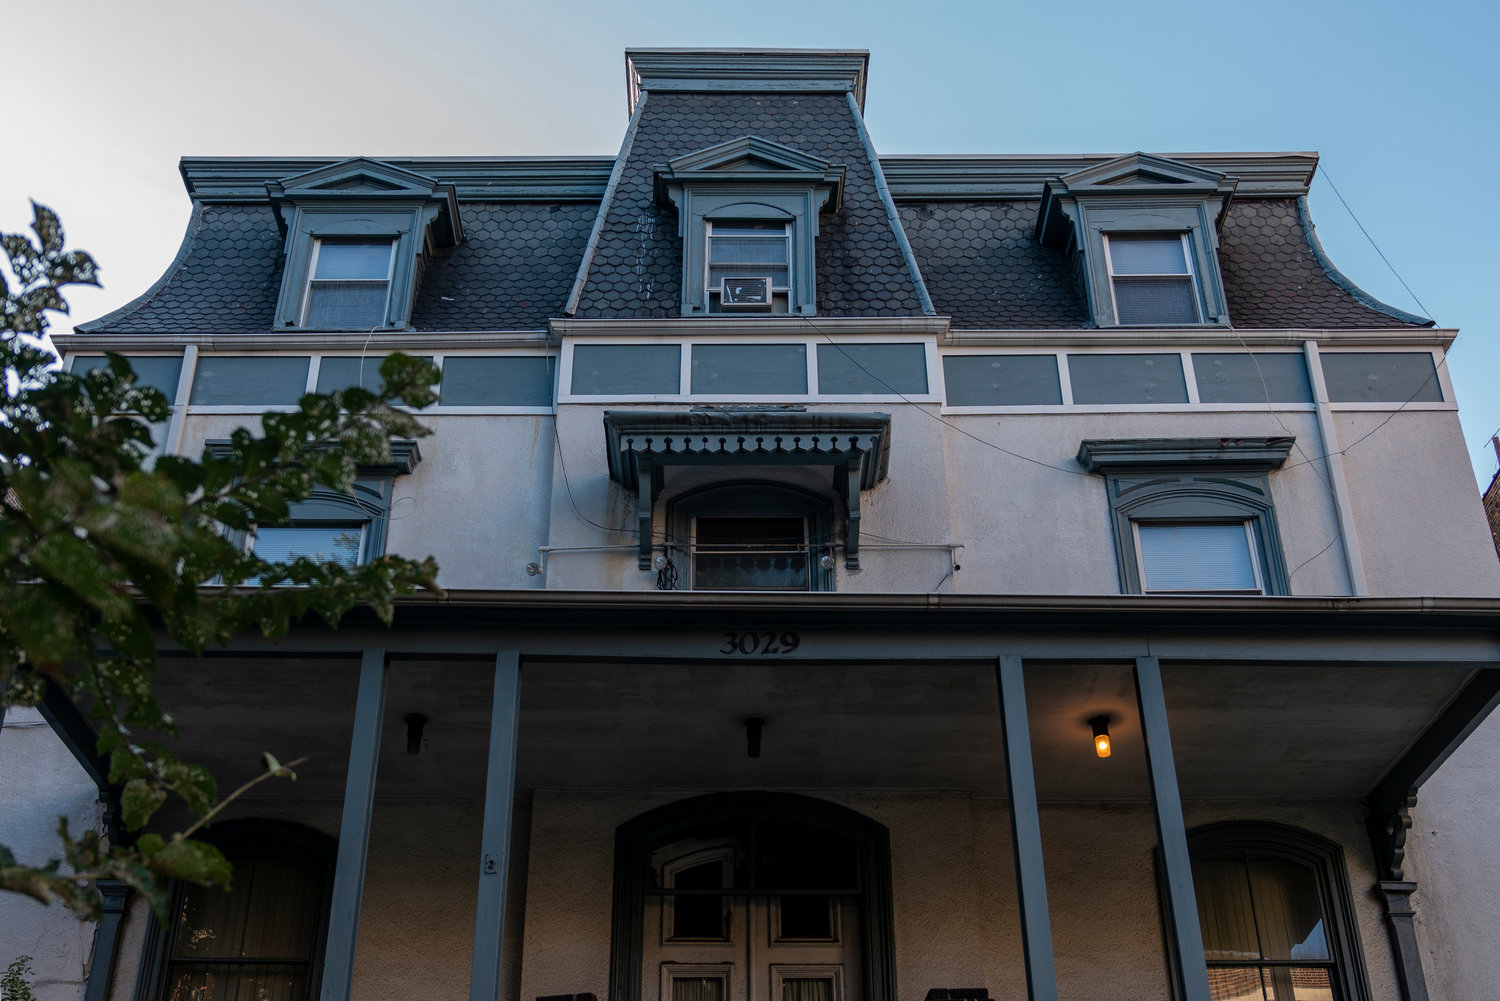 For the first time in decades, the Moller Mansion at 3029 Godwin Terrace has changed hands. But its new owner — who paid a hefty $1.5 million for the property — is likely more interested in the land than the home, meaning its days are almost assuredly numbered.